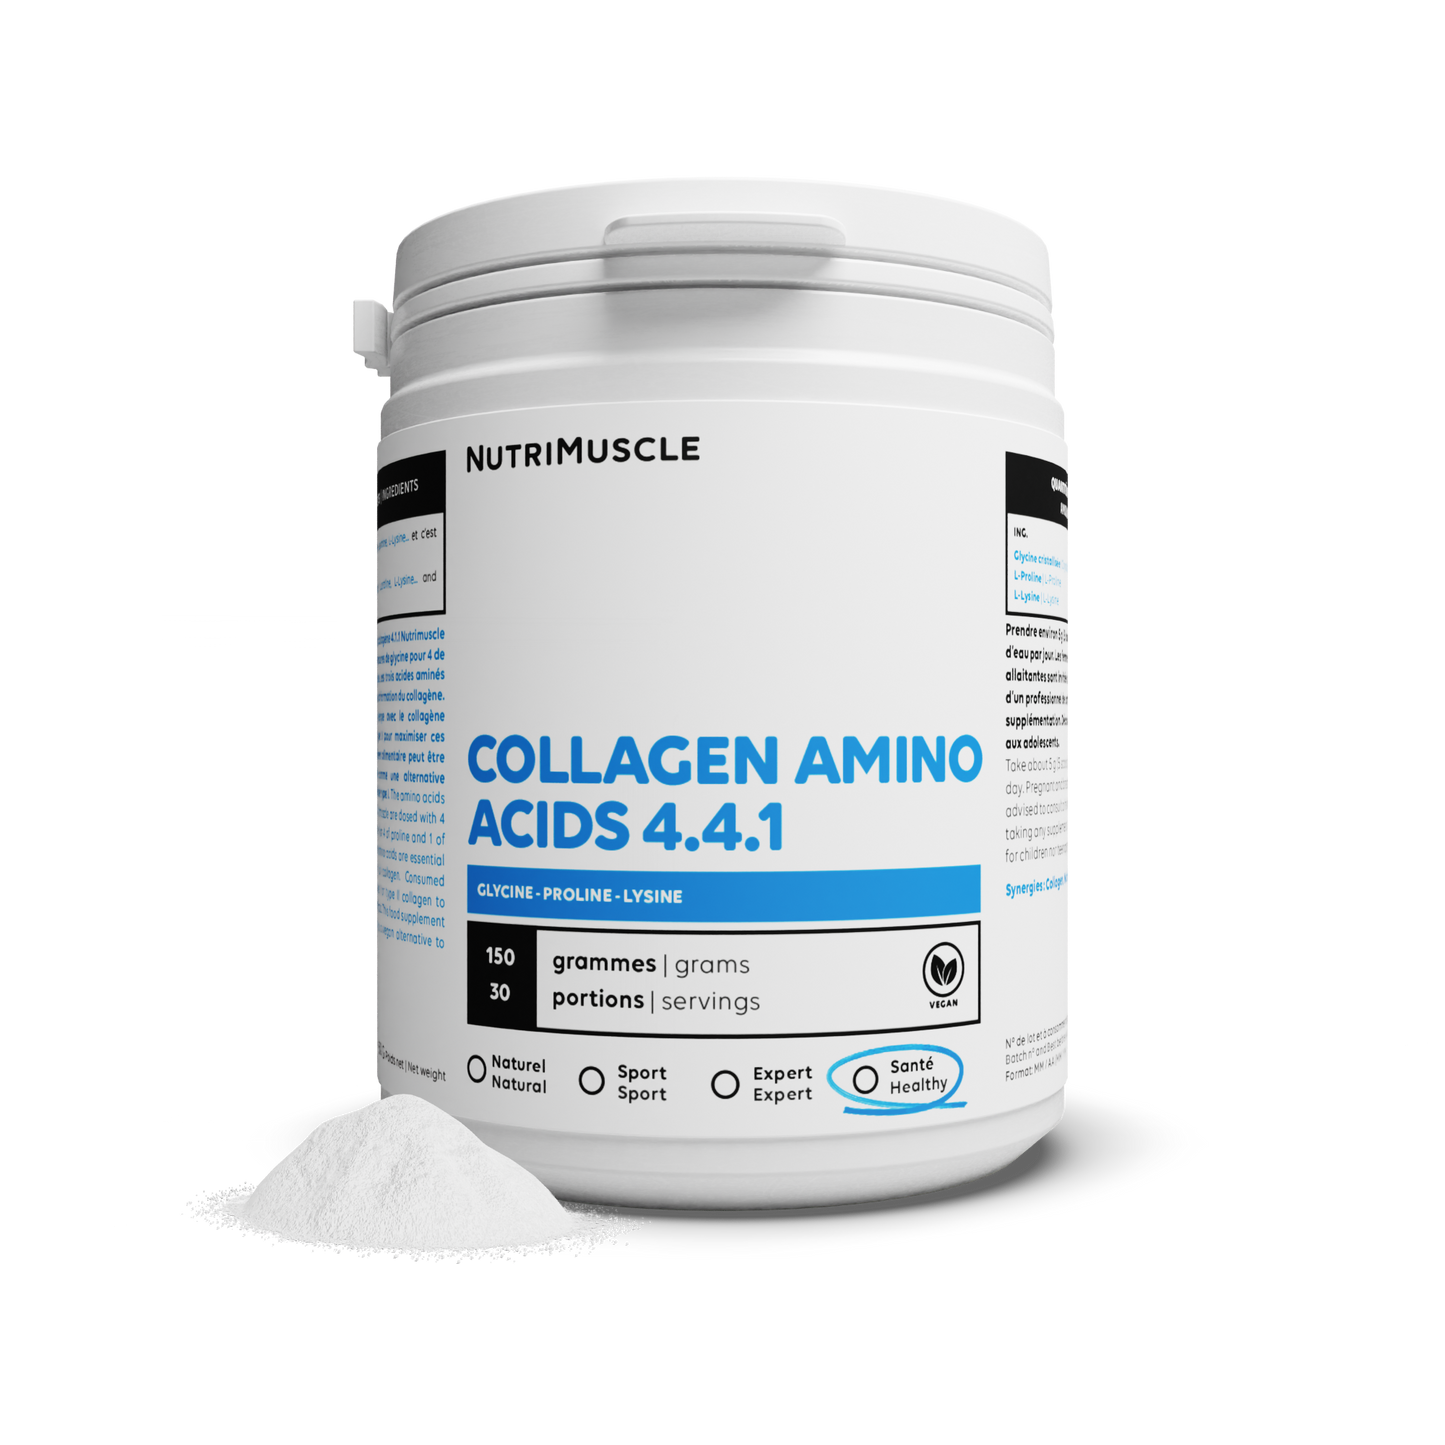 Whey native biological isolate